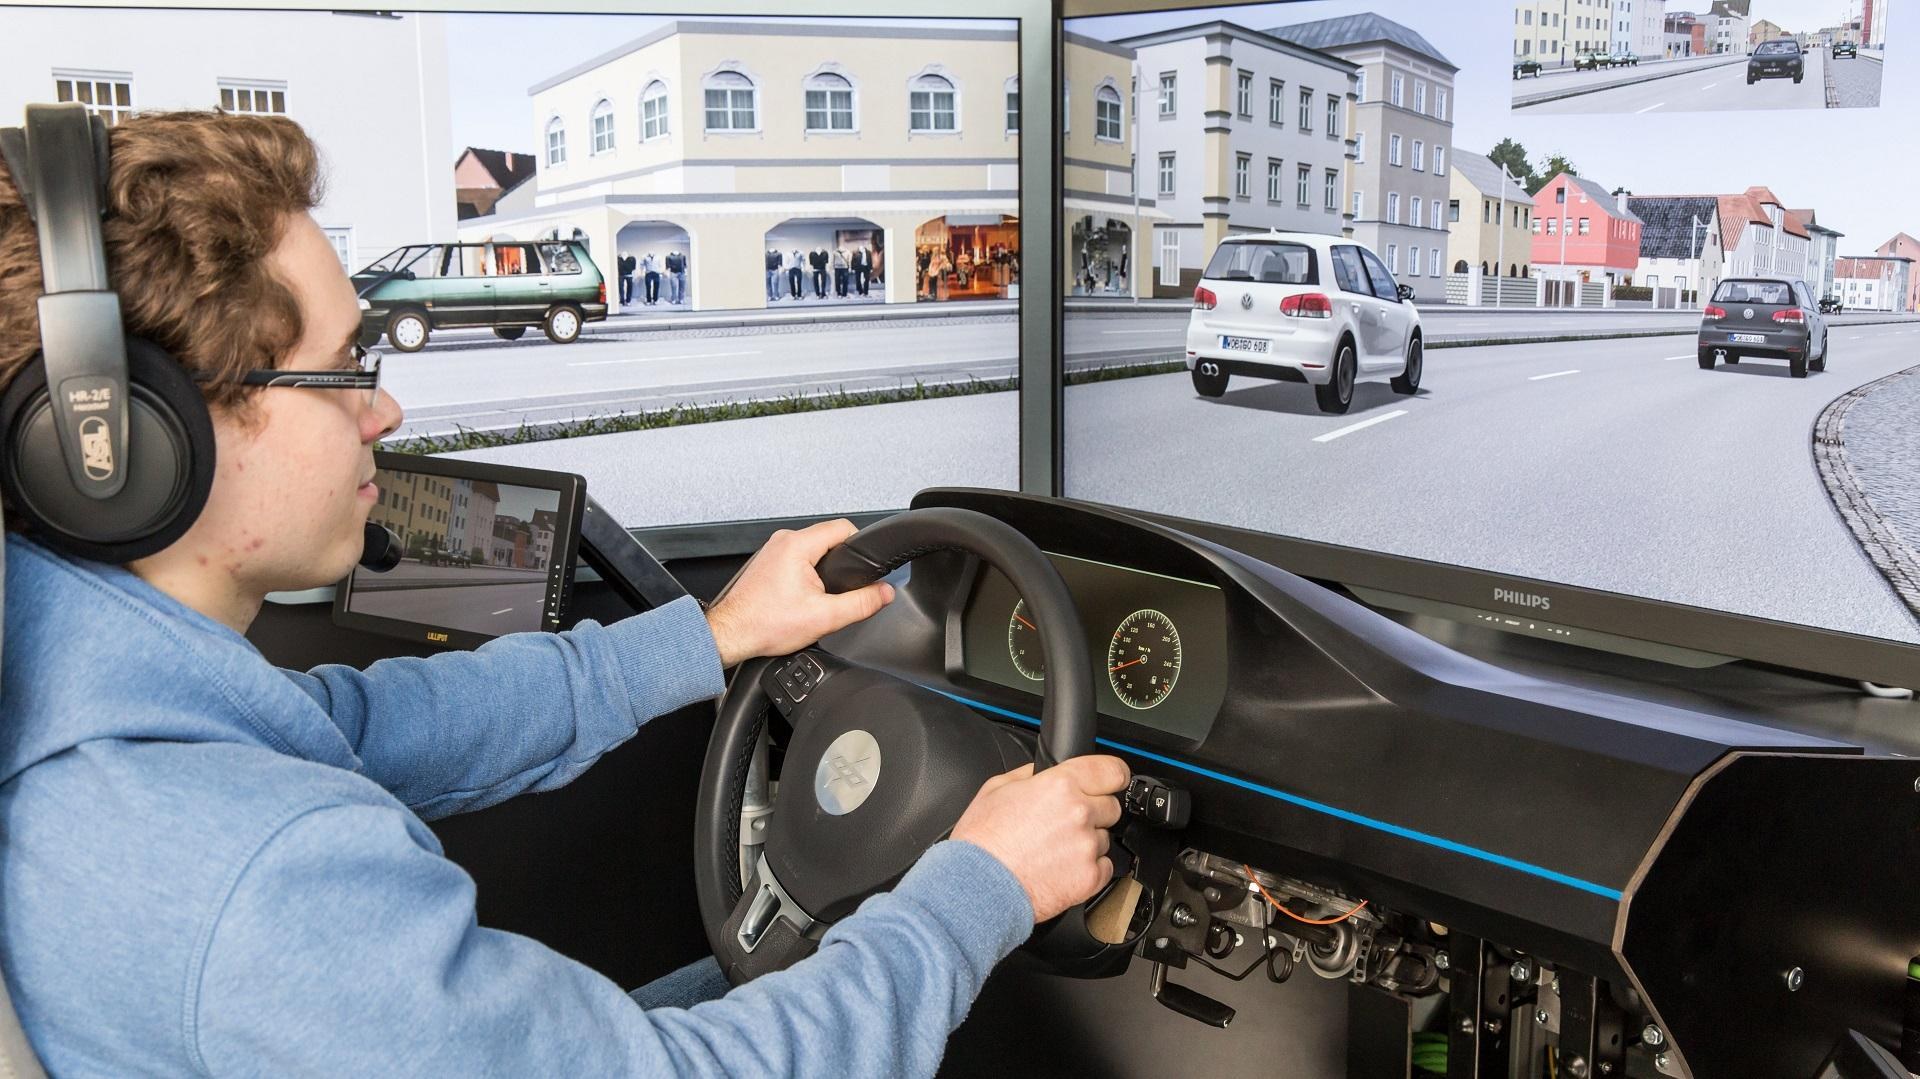 MoSAIC at DLR in Braunschweig is used to develop new driver assistance systems